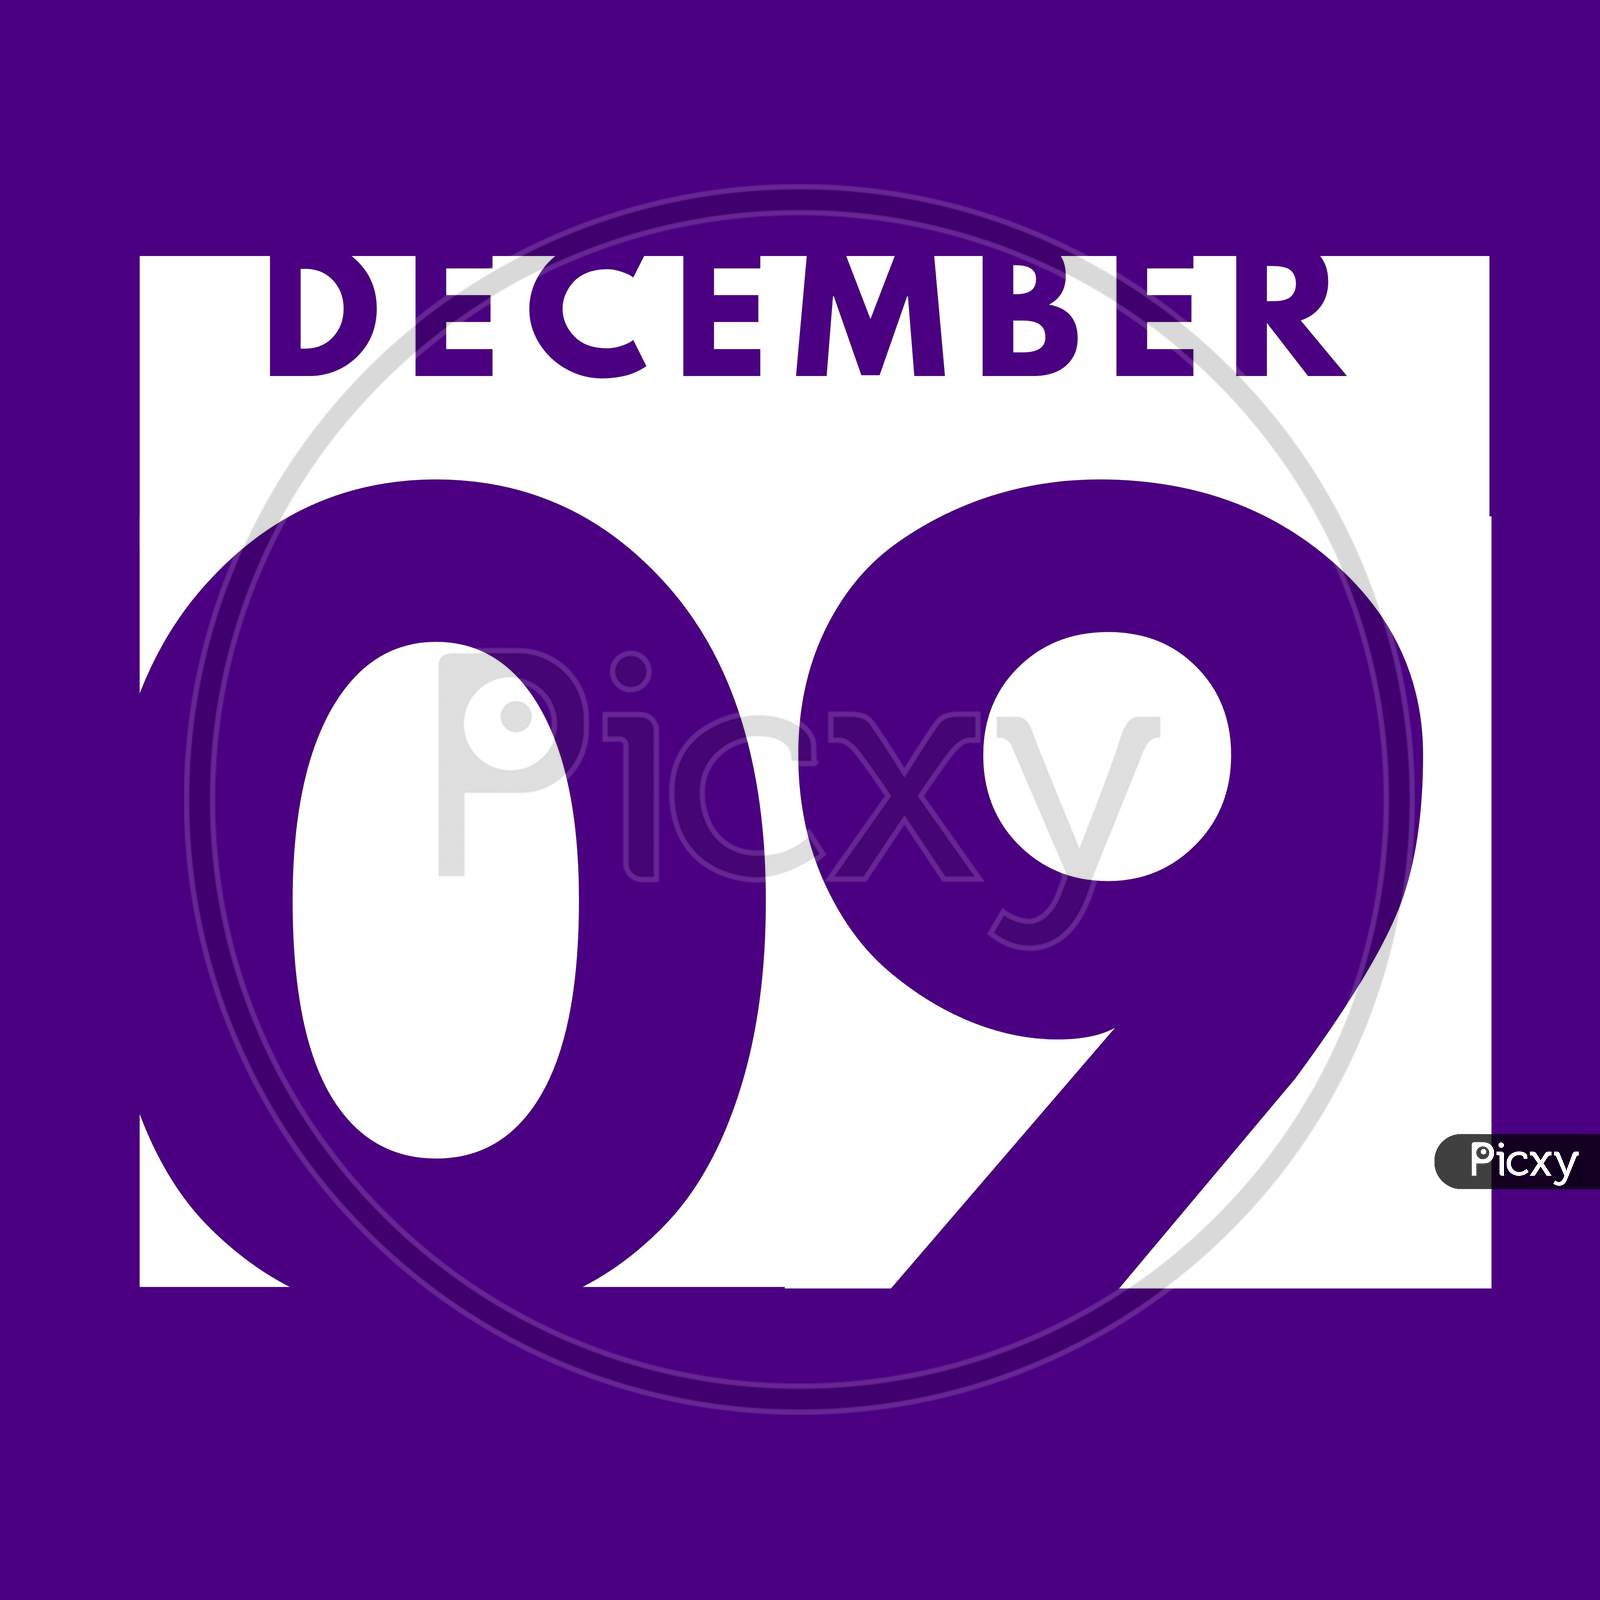 December 9 . Flat Modern Daily Calendar Icon .Date ,Day, Month .Calendar For The Month Of December